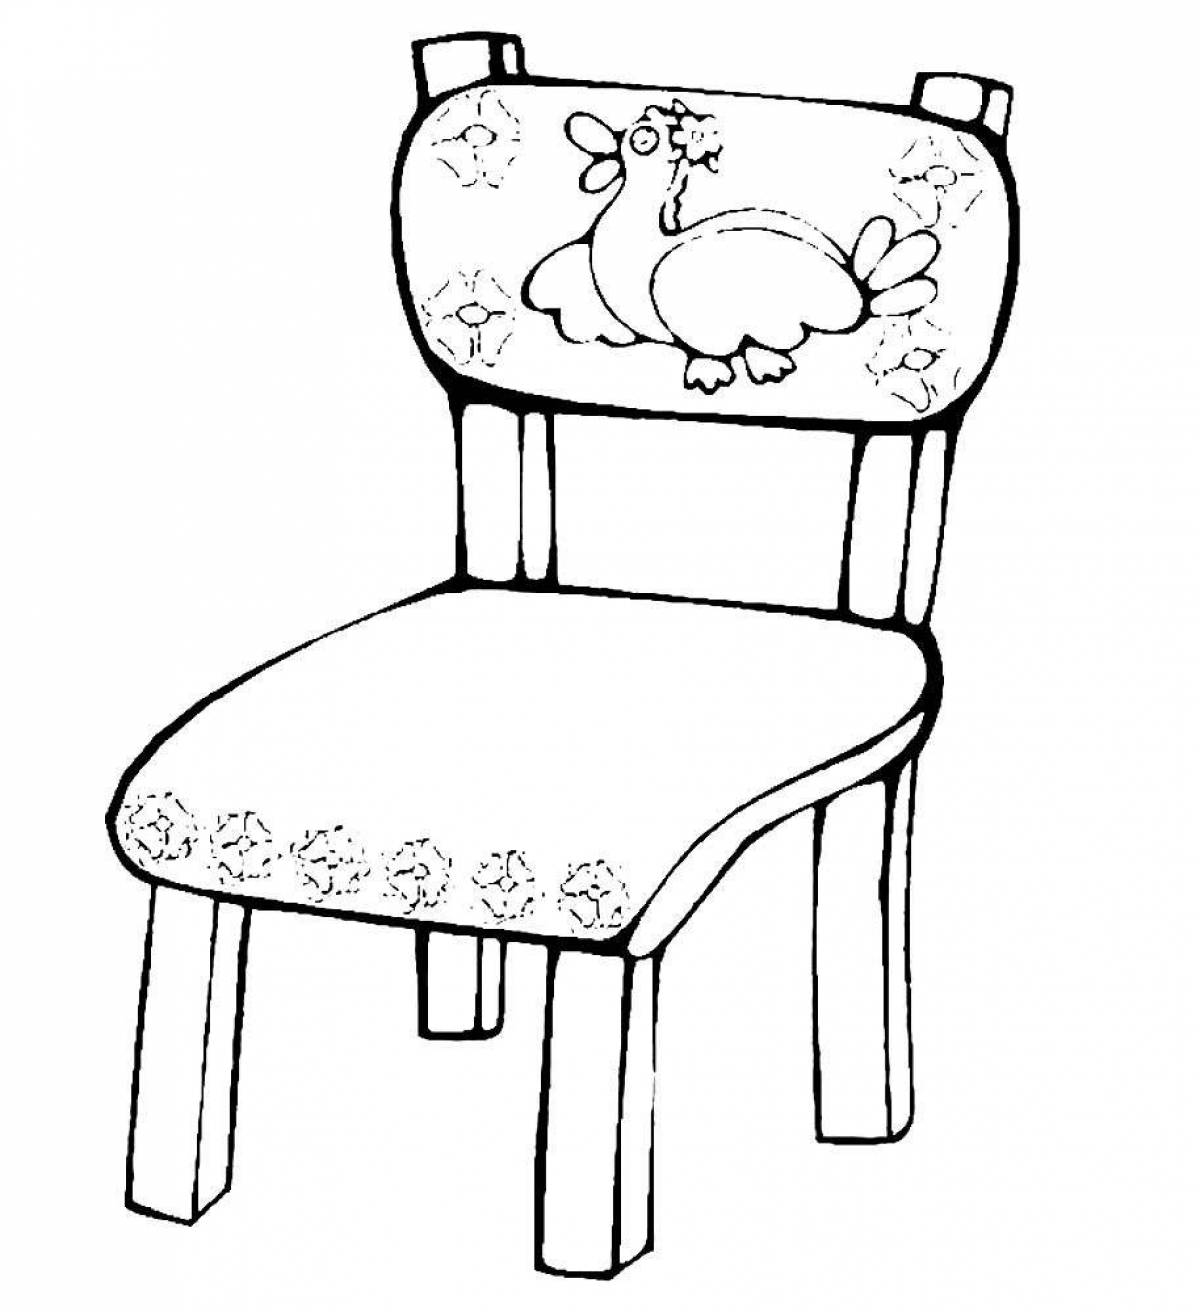 Unique furniture coloring book for kids 4-5 years old